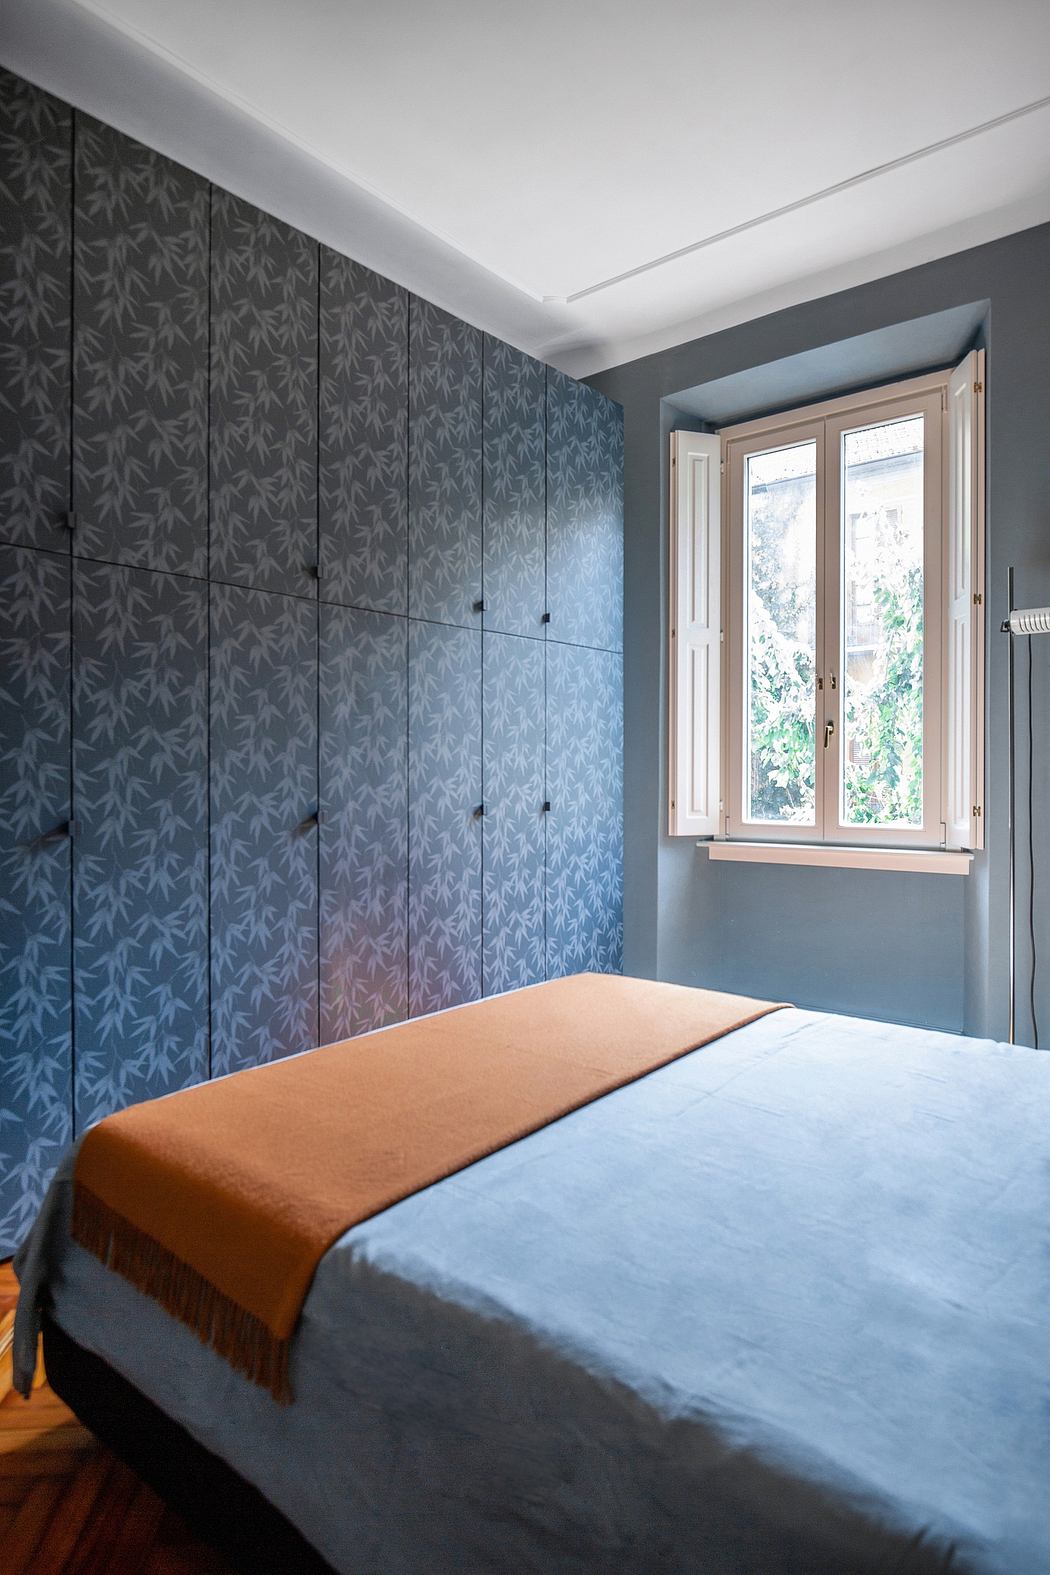 Contemporary bedroom with patterned wall and blue bedspread.